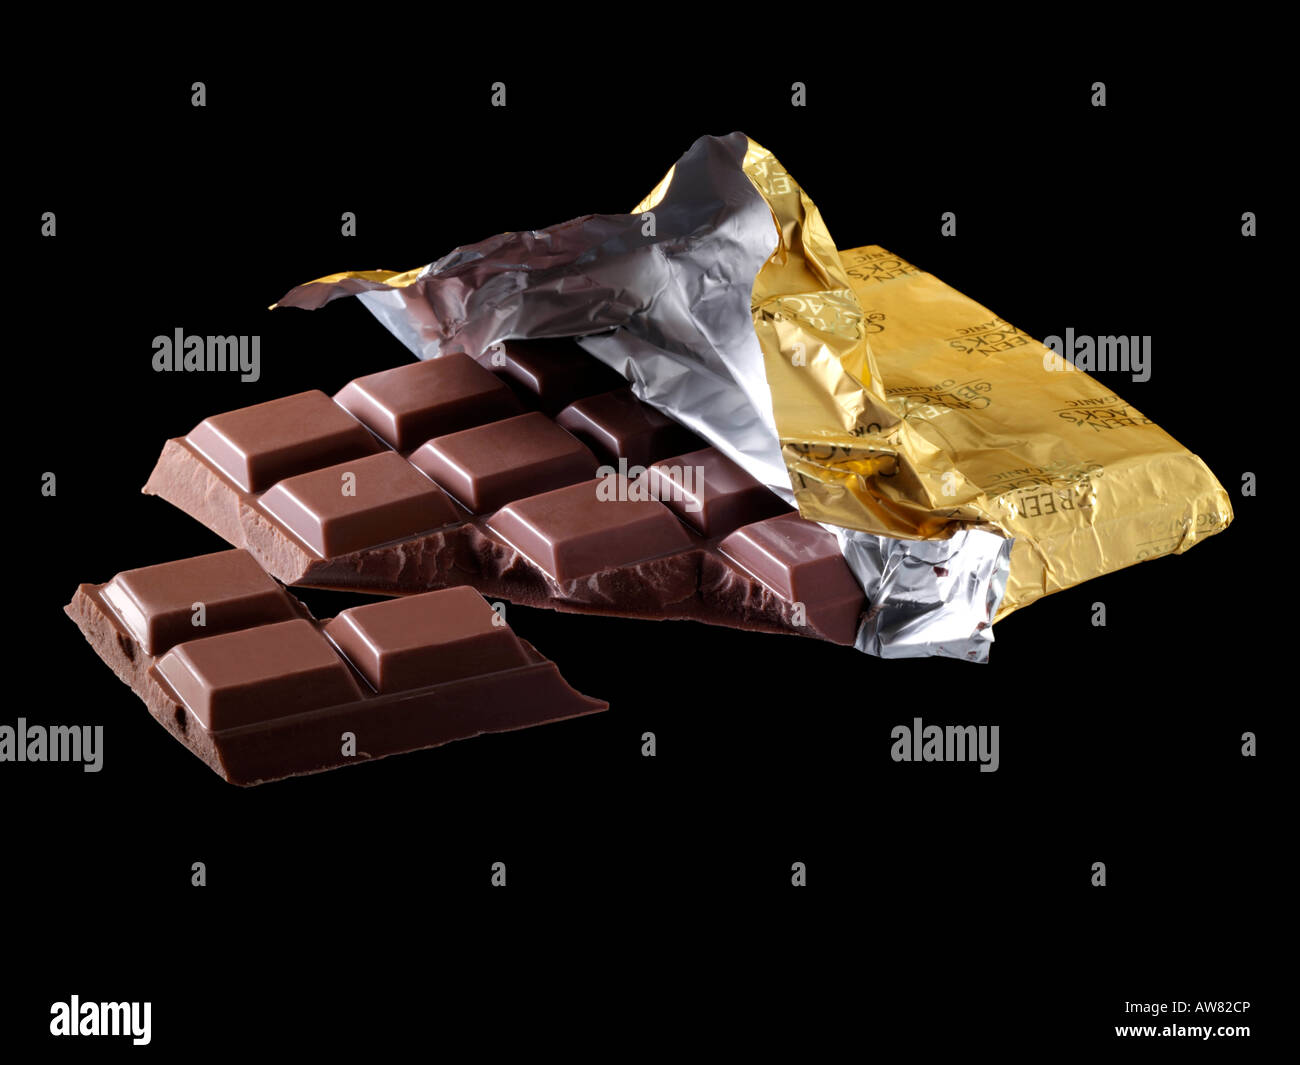 Chocolate bar with gold foil wrapper Stock Photo - Alamy